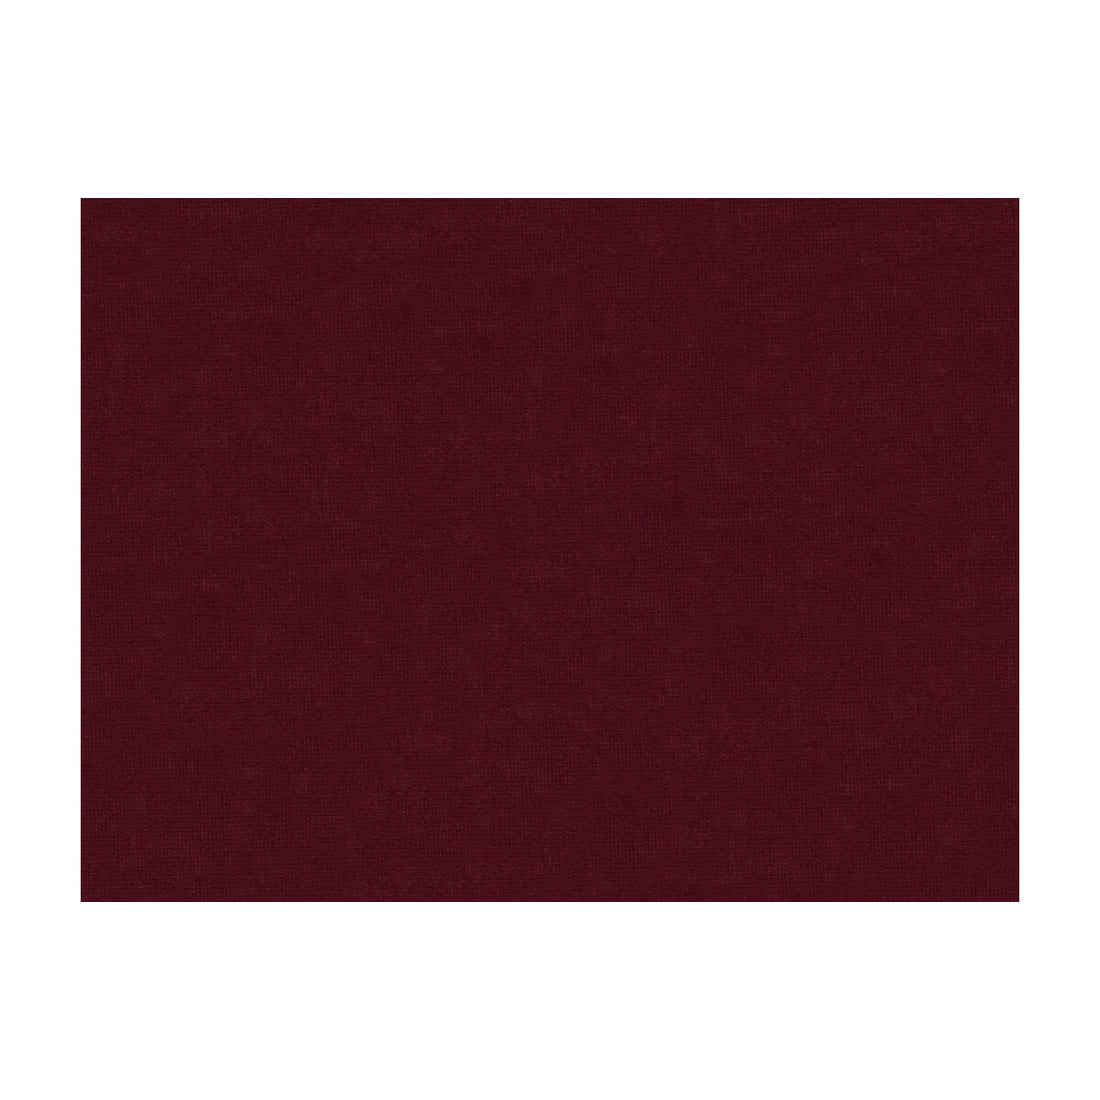 Charmant Velvet fabric in chianti color - pattern 8013150.909.0 - by Brunschwig &amp; Fils